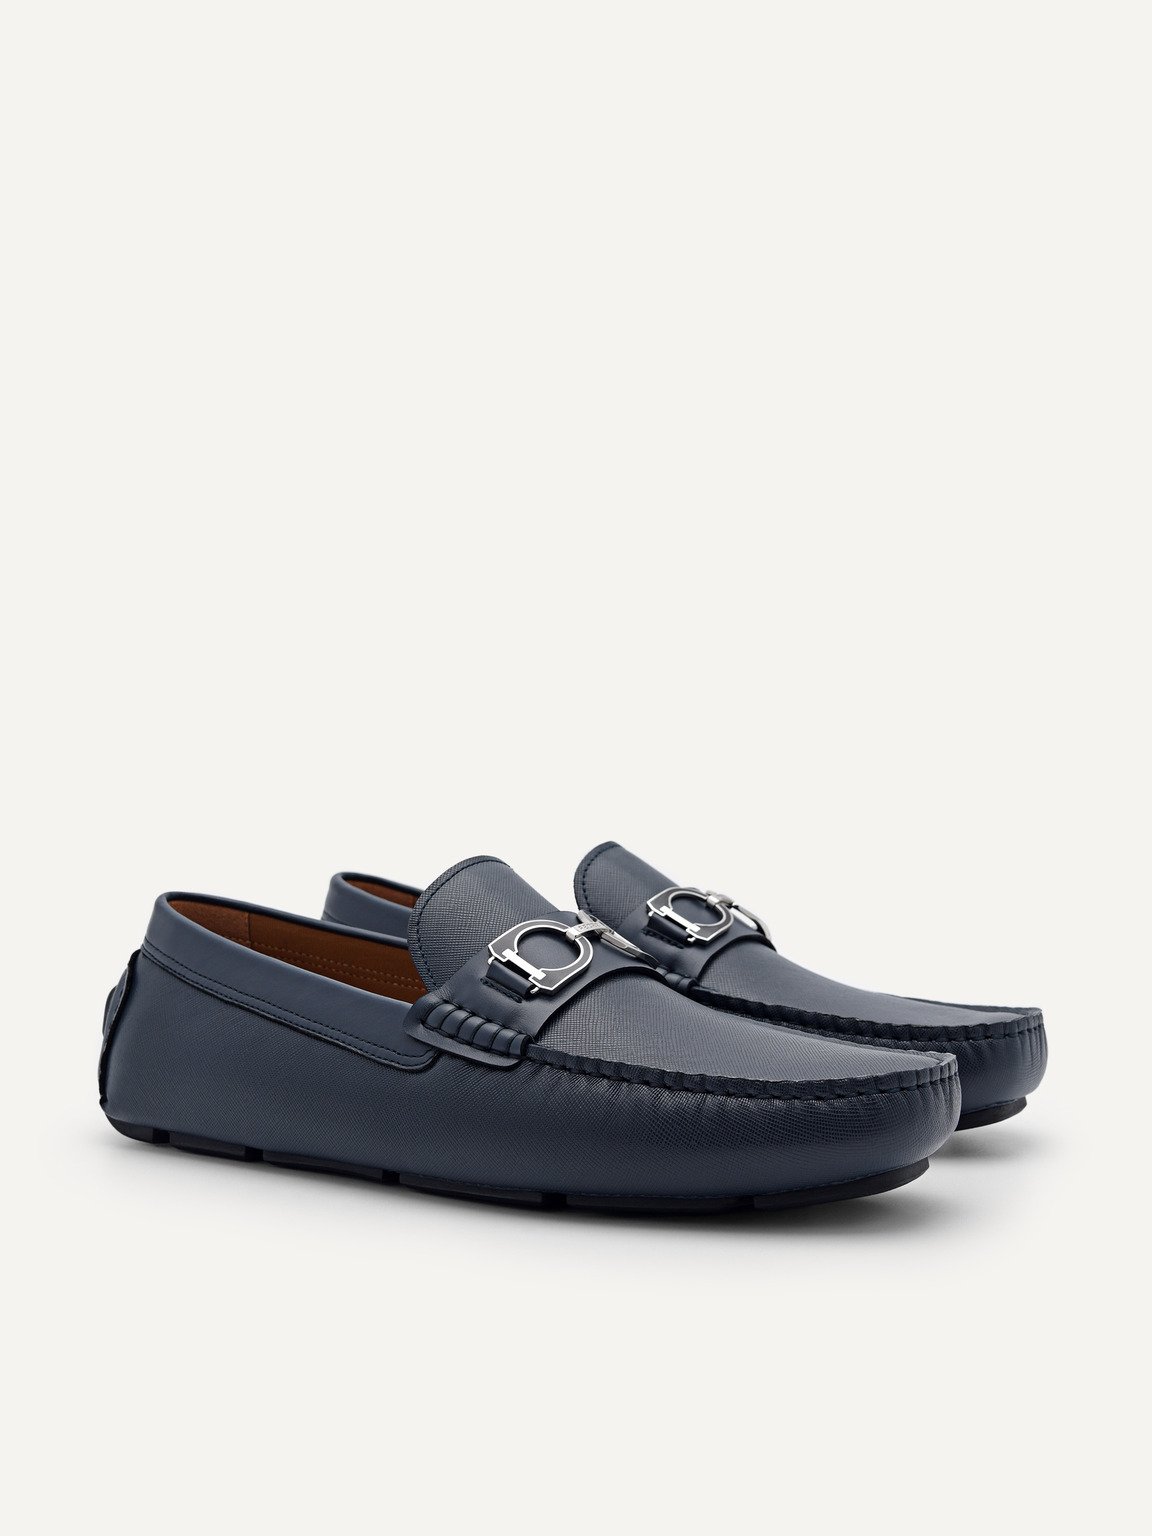 Antonio Leather Driving Shoes, Navy